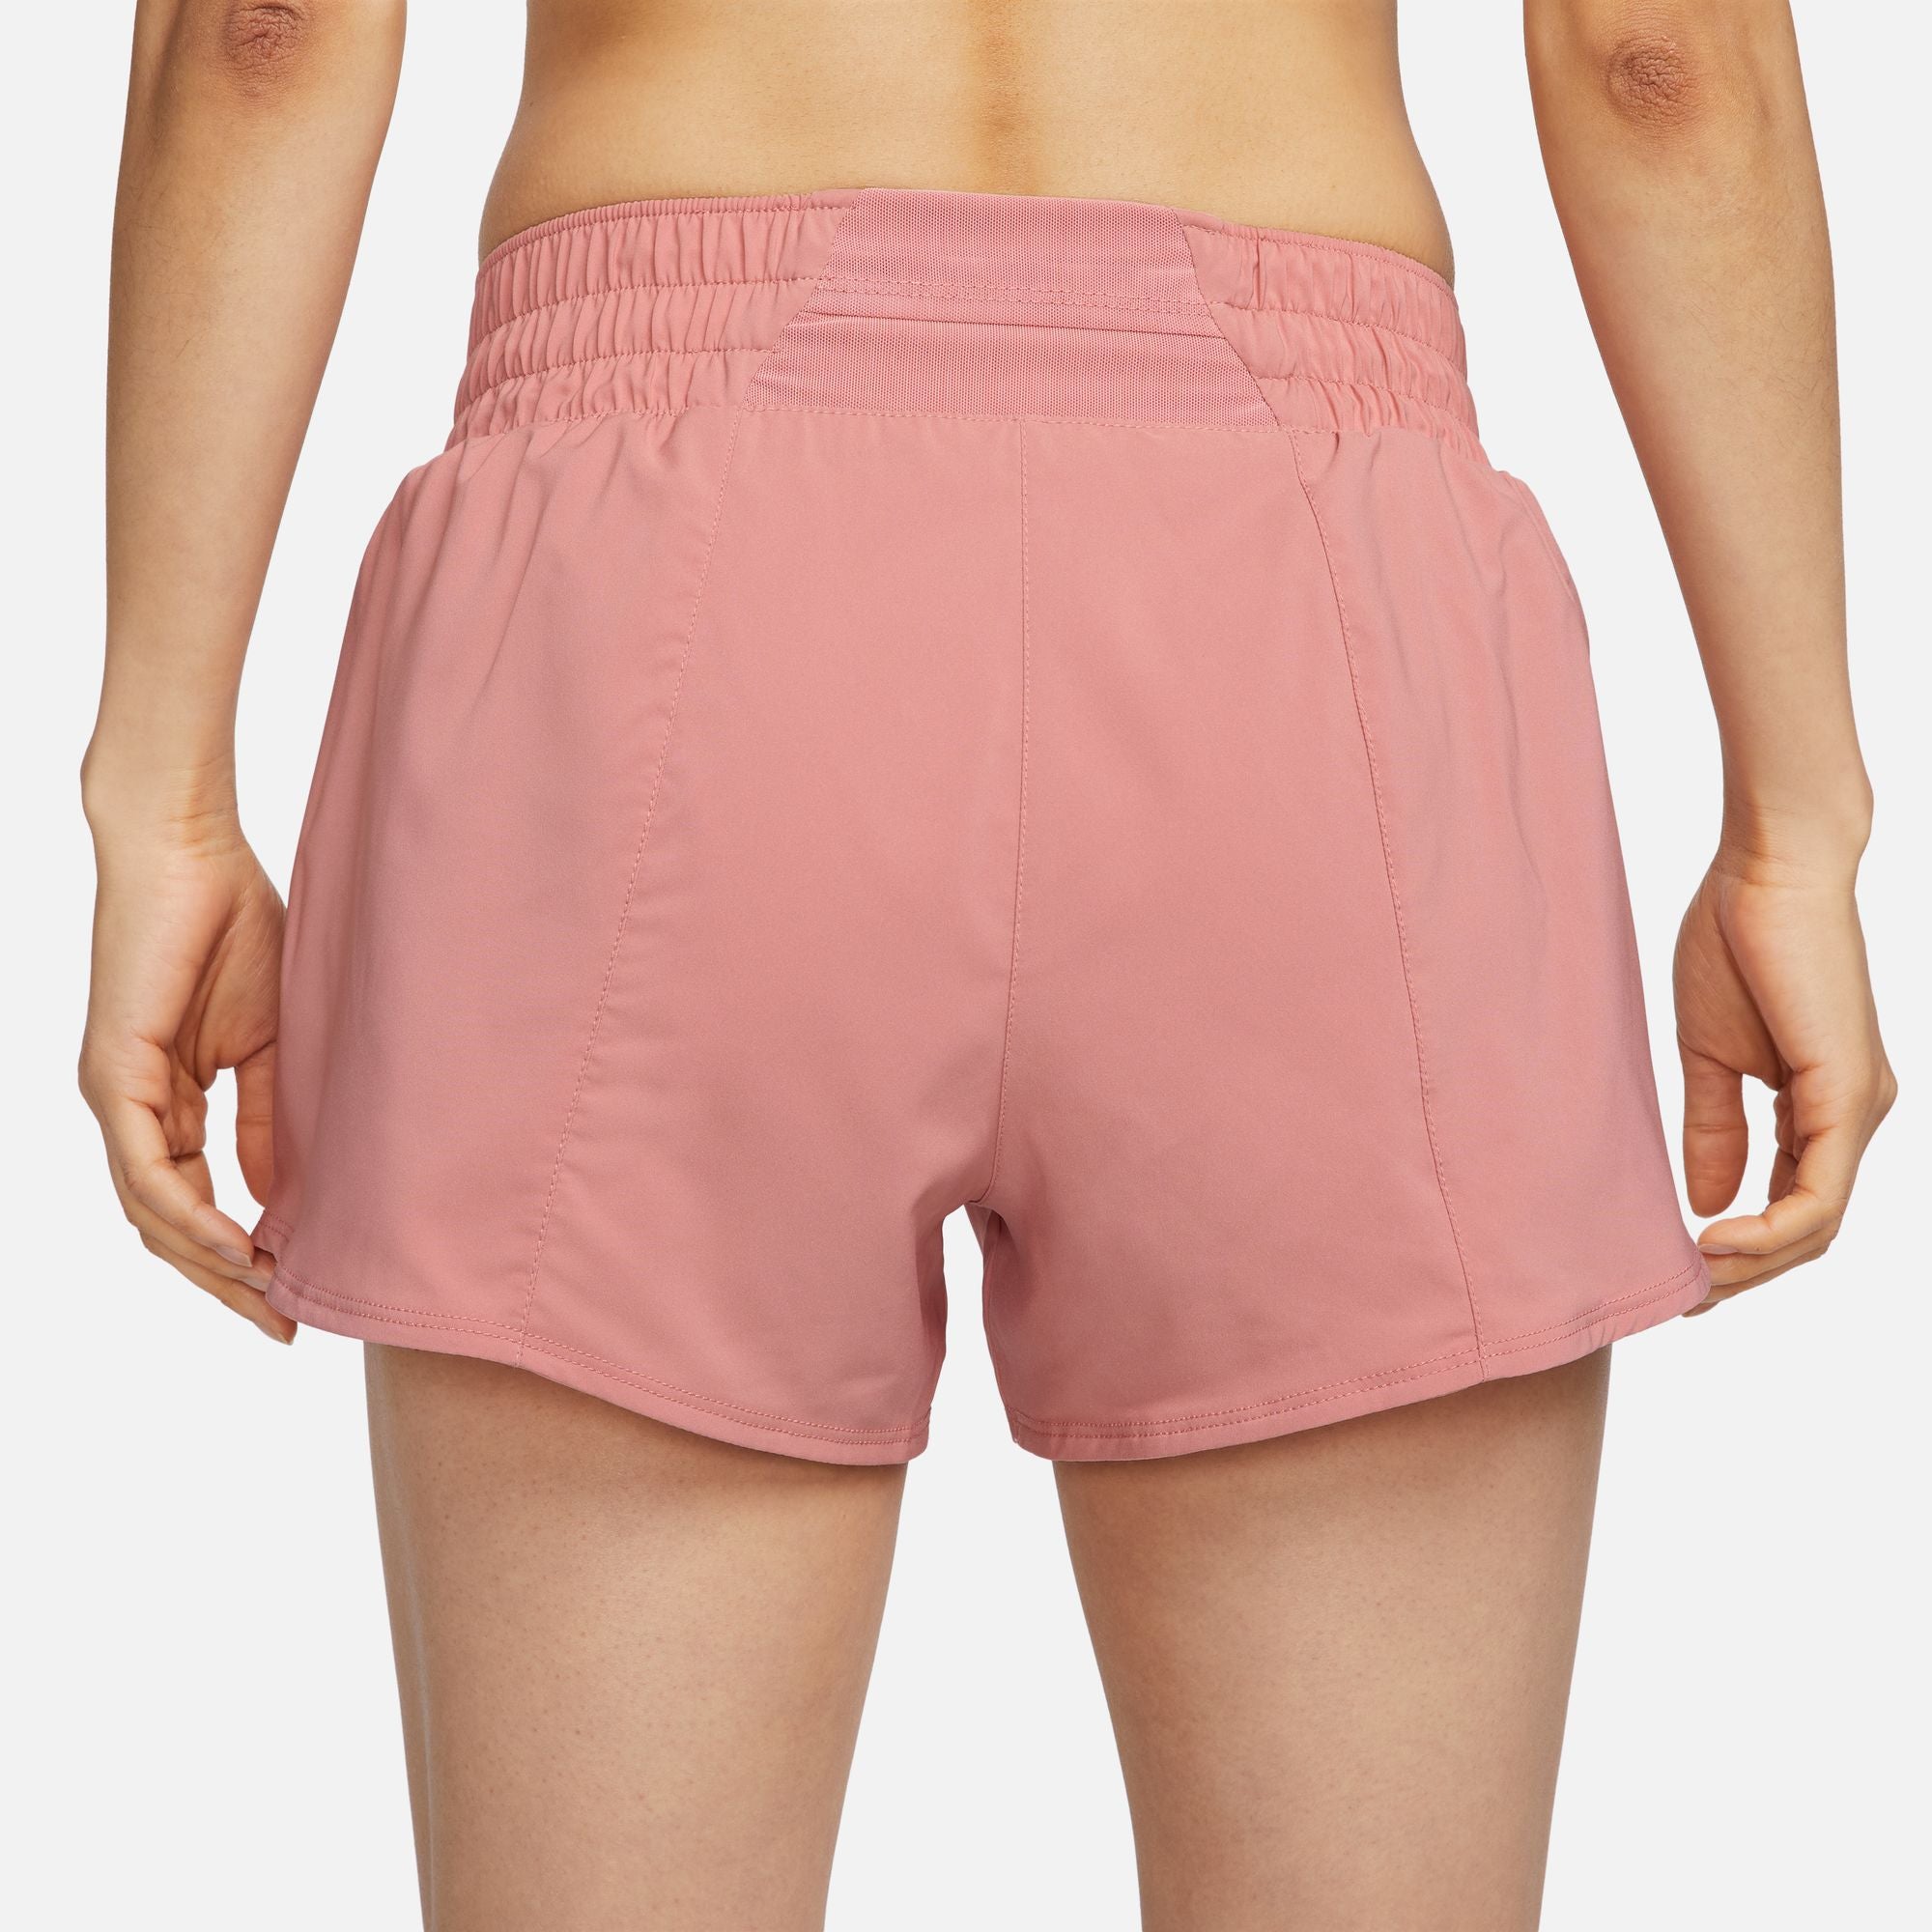 NIKE DRI-FIT ONE SWOOSH WOMEN'S MID-RISE BRIEF-LINED RUNNING SHORTS